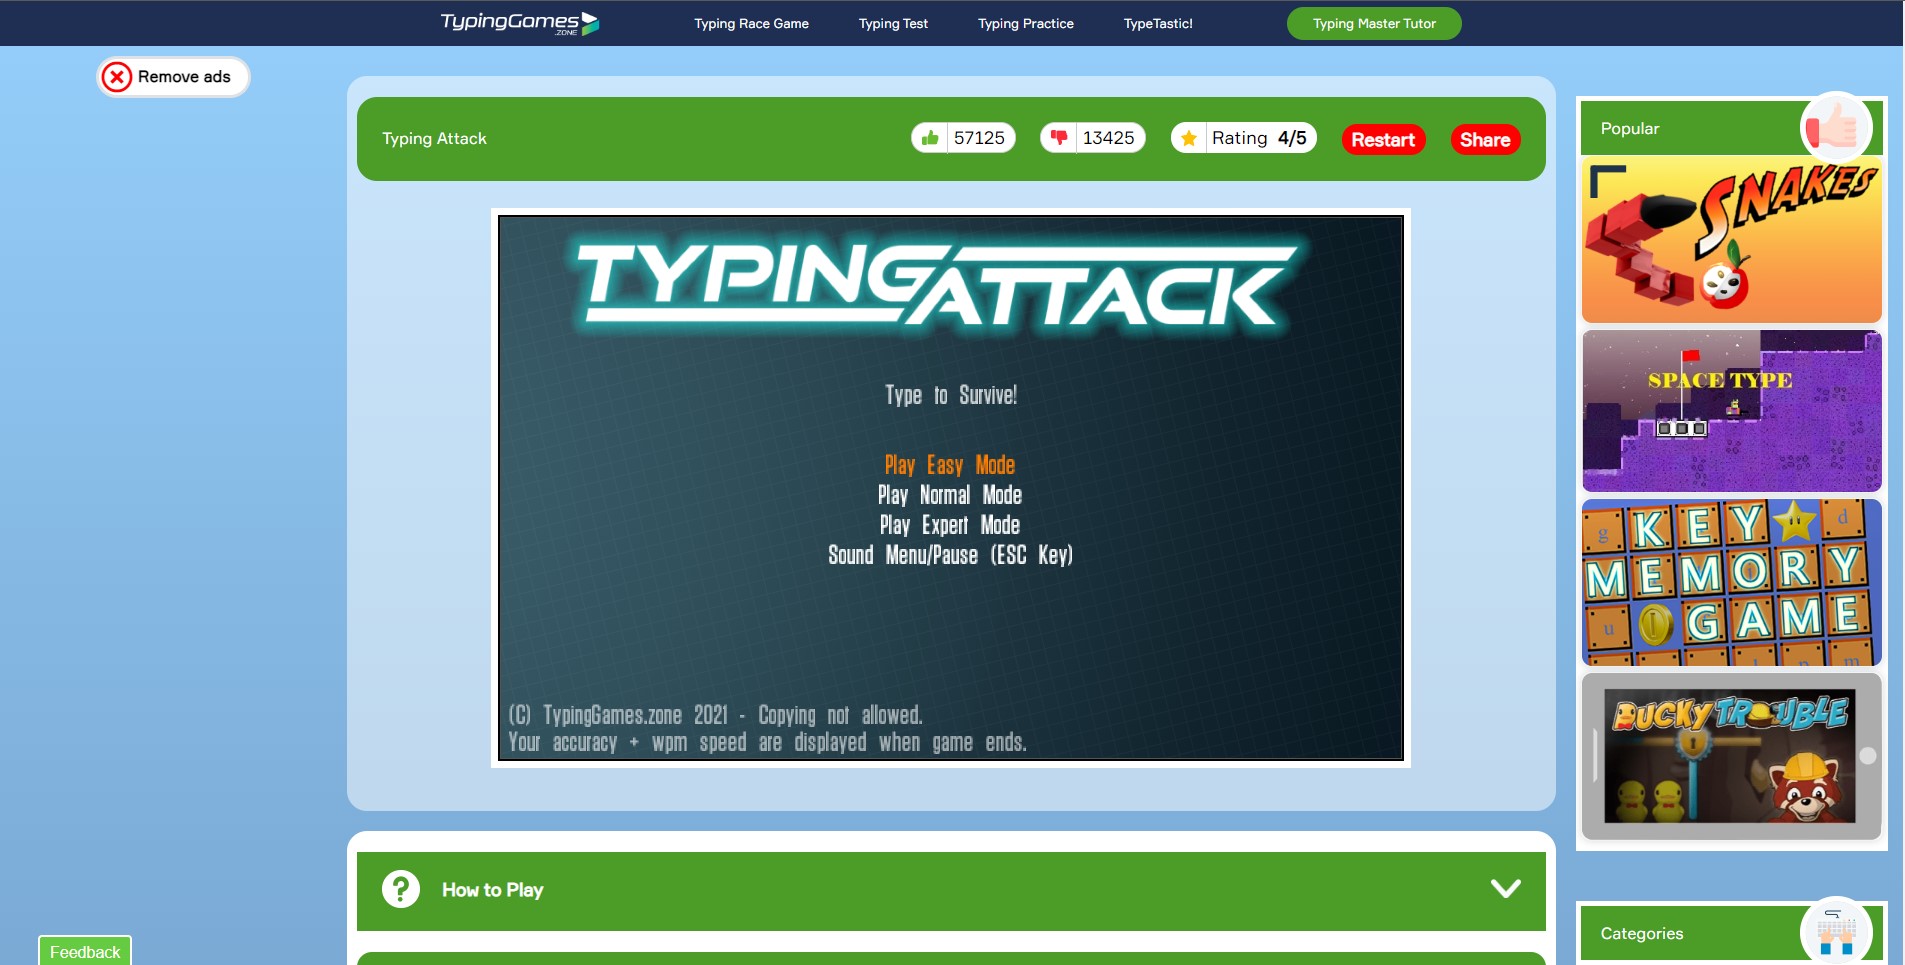 8 Best Typing Games on the Internet in 2021 - TechWiser